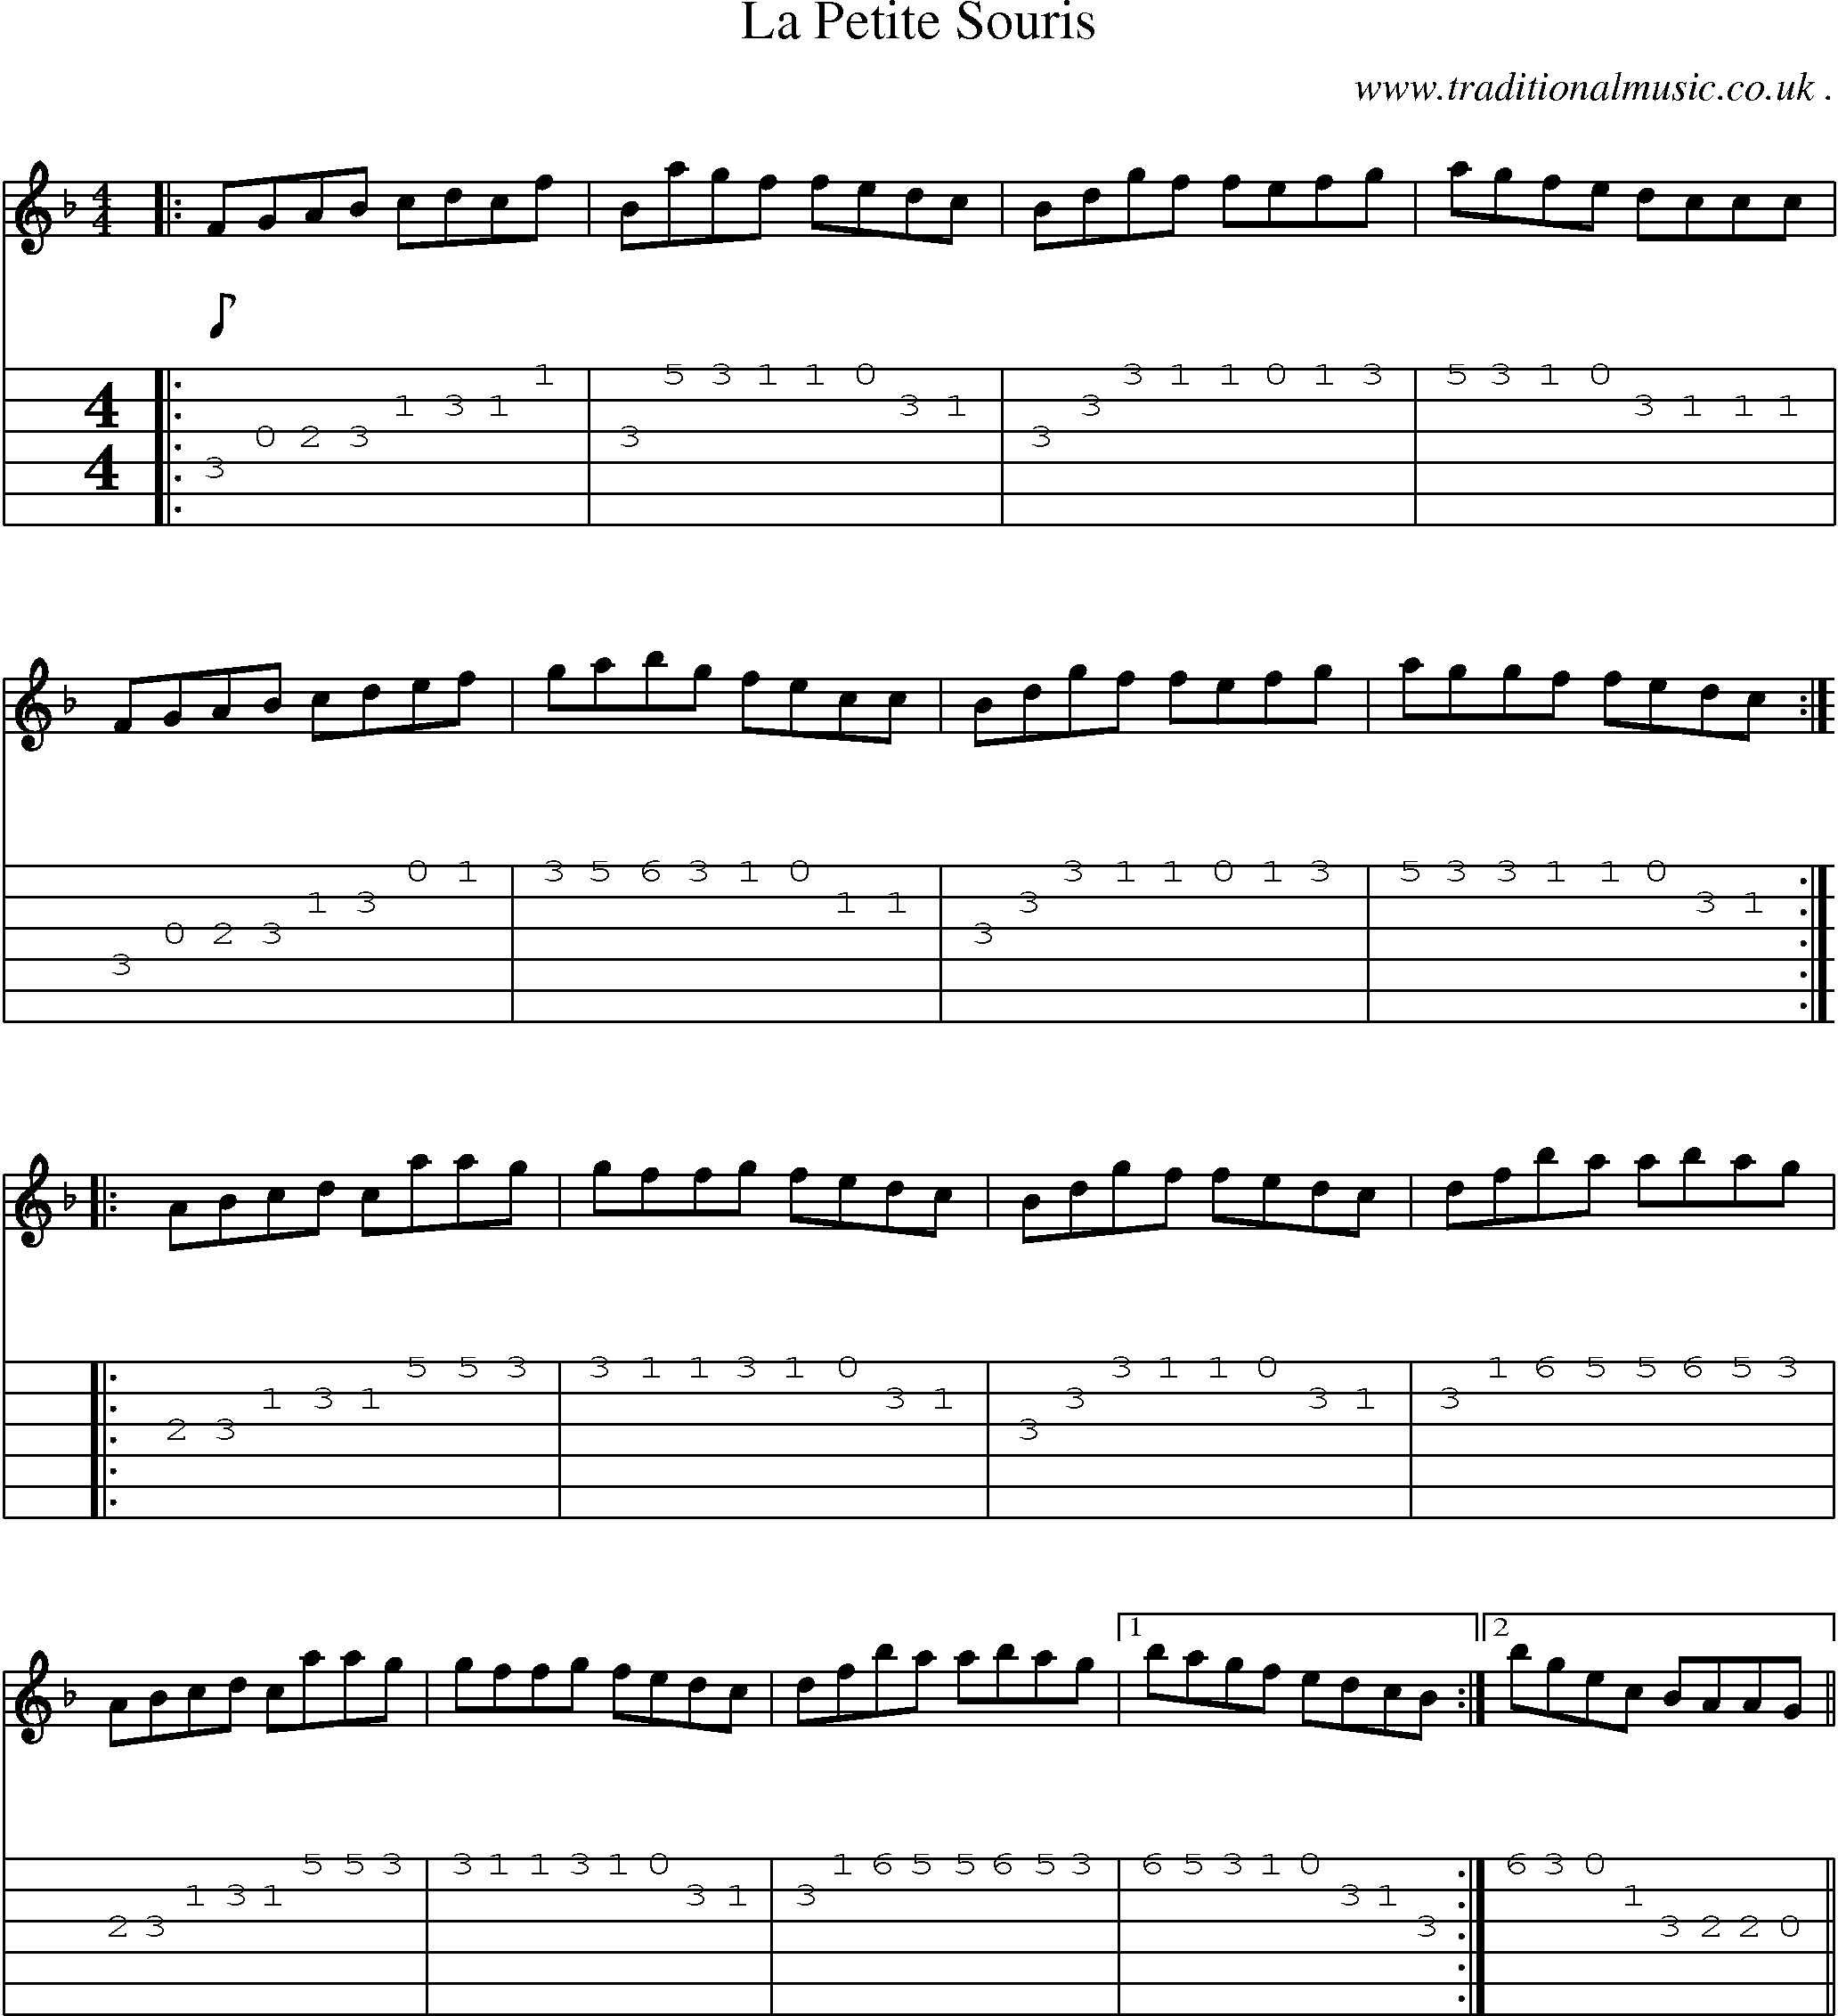 Sheet-Music and Guitar Tabs for La Petite Souris